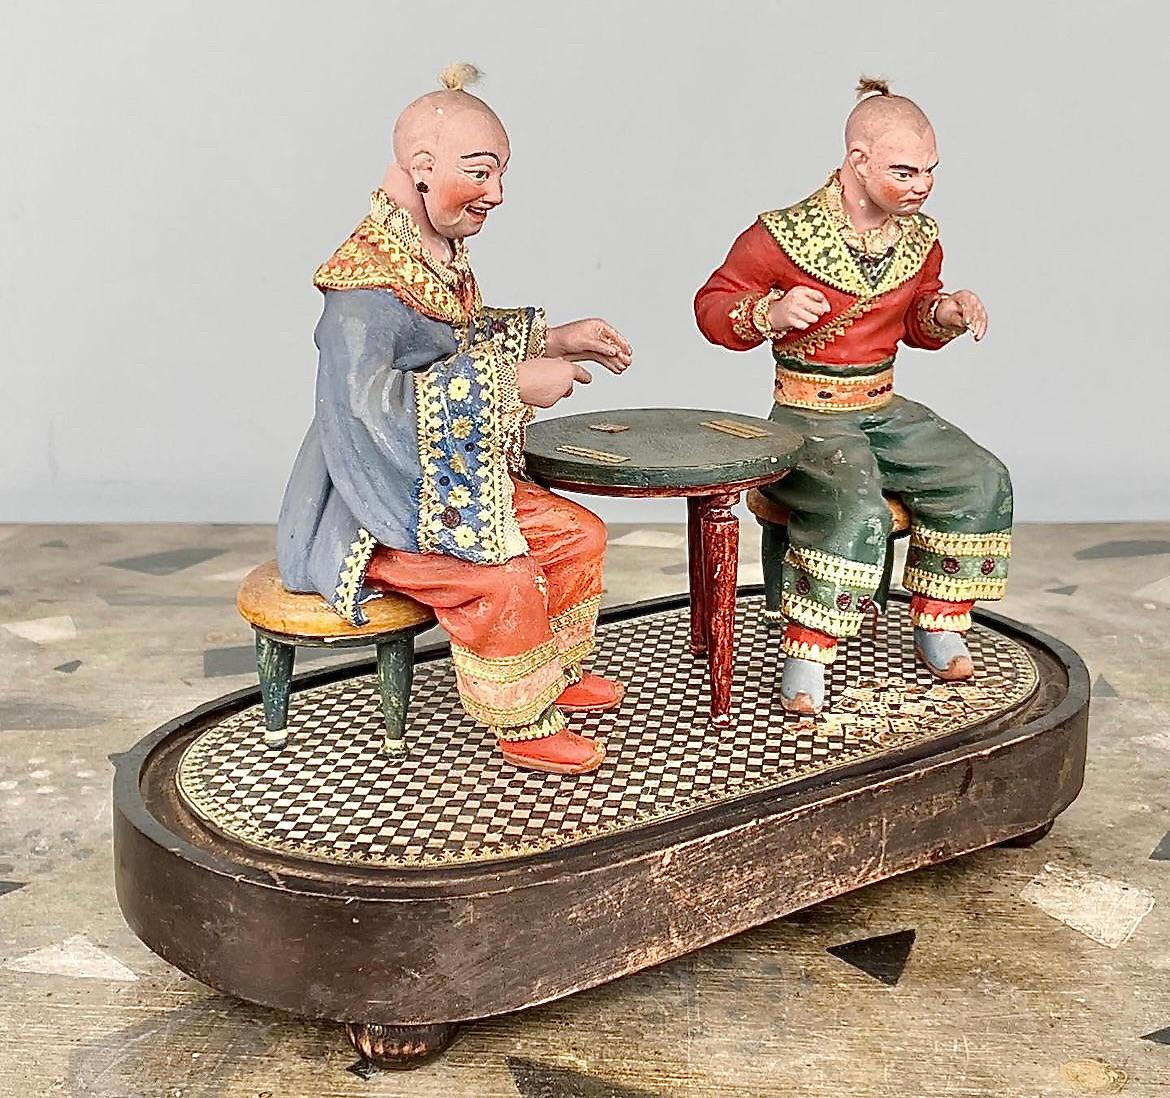 A rare Regency polychrome painted pottery diorama of two Chinoiserie card-players, shown in traditional dress and with nodding heads seated at a circular table with cards also strewn across the checkered floor. The left hand figure nodding his head